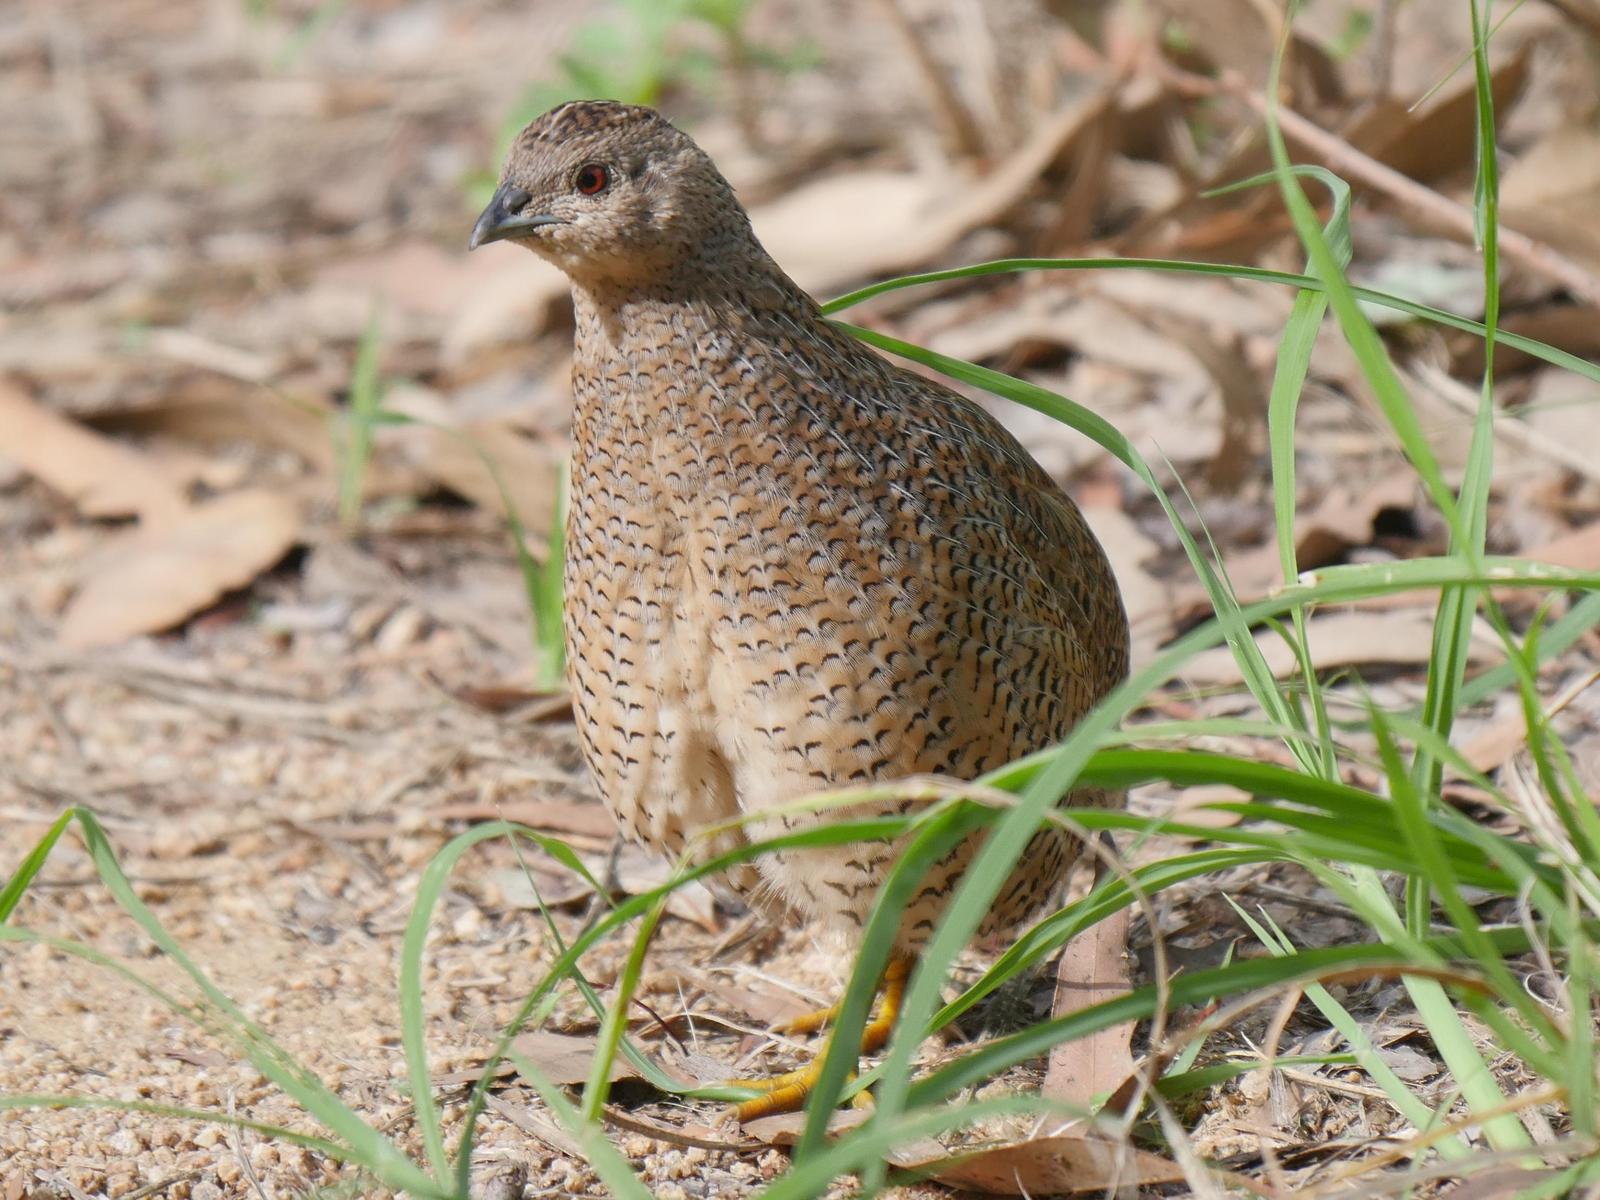 Brown Quail Photo by Peter Lowe